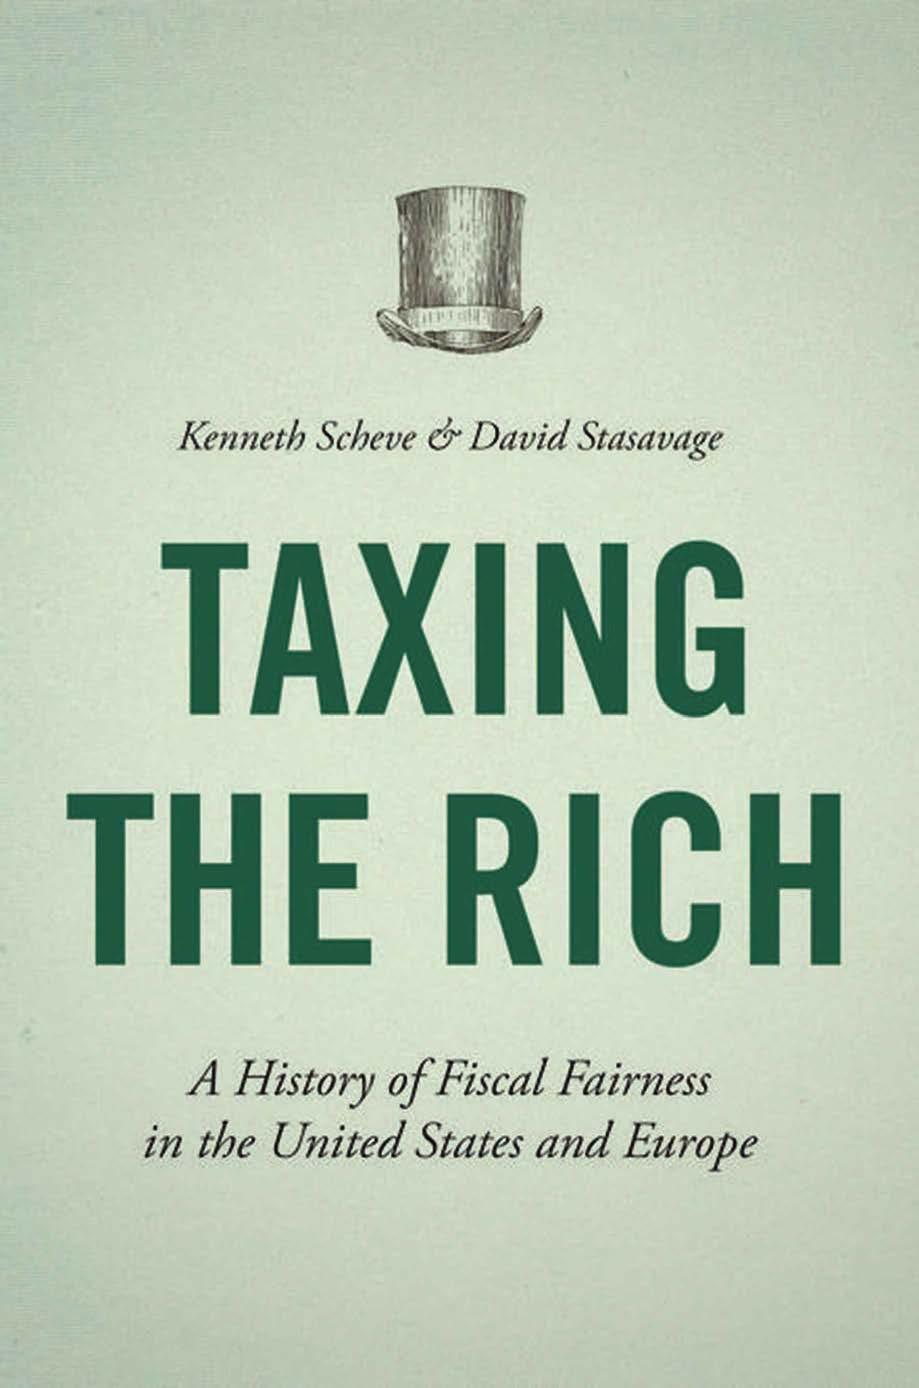 Taxing the Rich: A History of Fiscal Fairness in the United States and Europe by Kenneth Scheve & David Stasavage